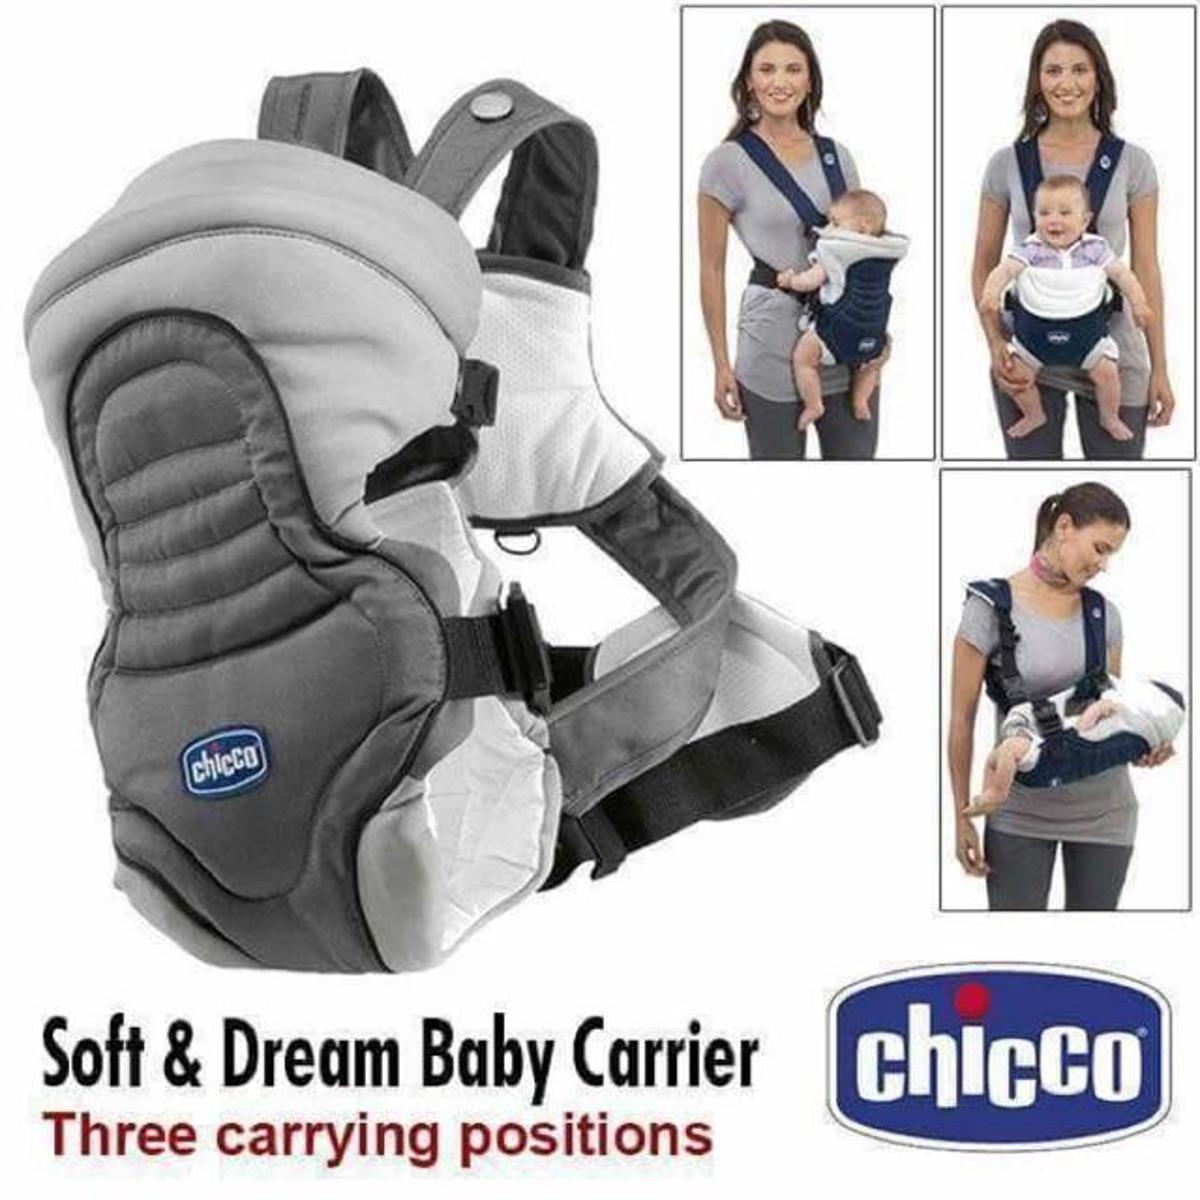 Chicco Soft & Dream Baby Carrier 0M+- 2 POSITION CARRIER FOR BABY 3.5KG-9KG